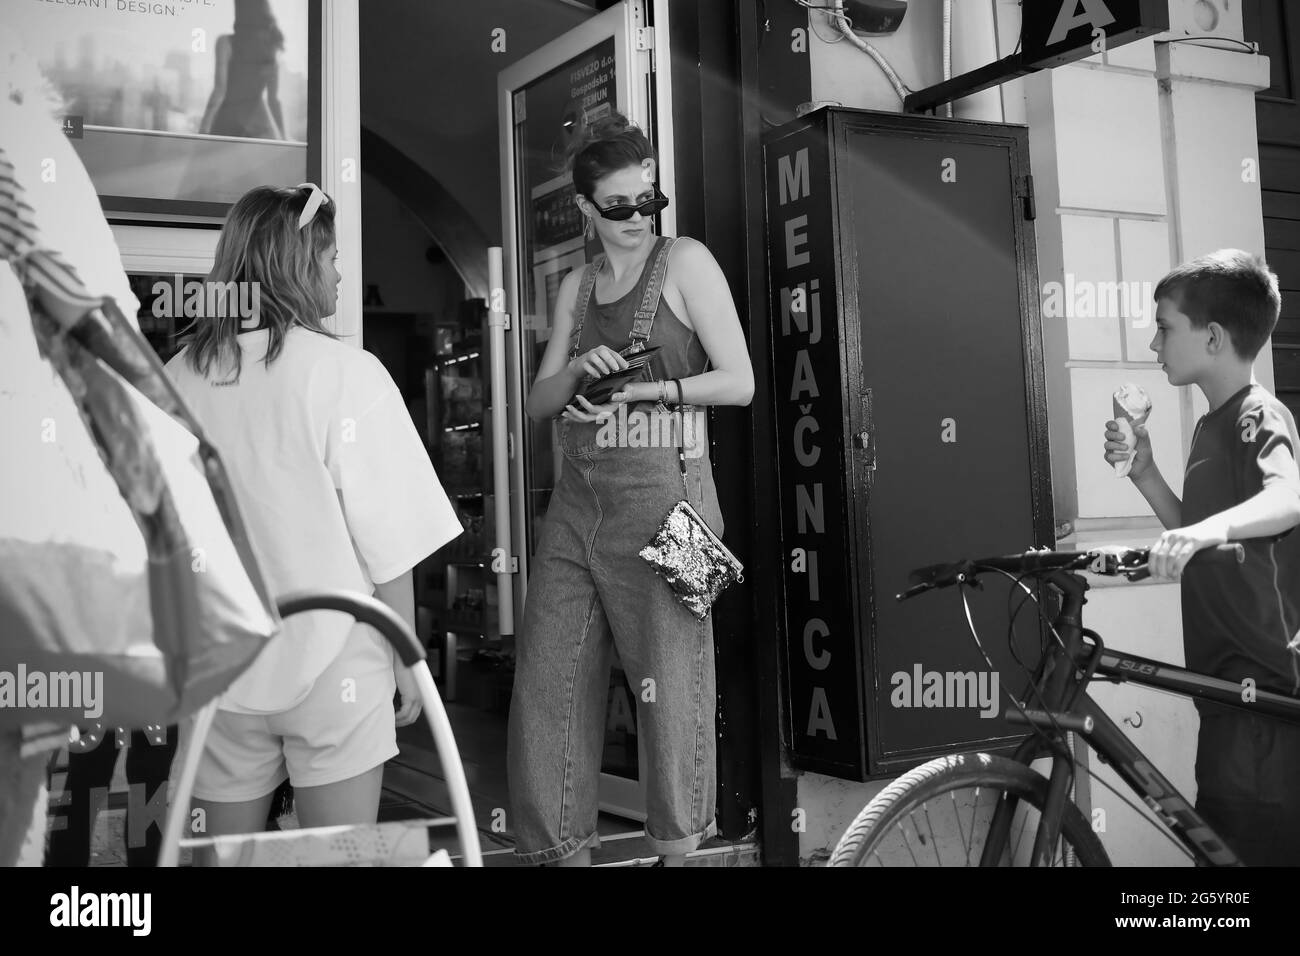 Belgrade, Serbia, May 23, 2021: Young woman waiting in a line in front of the store looks behind over sunglasses (B/W) Stock Photo